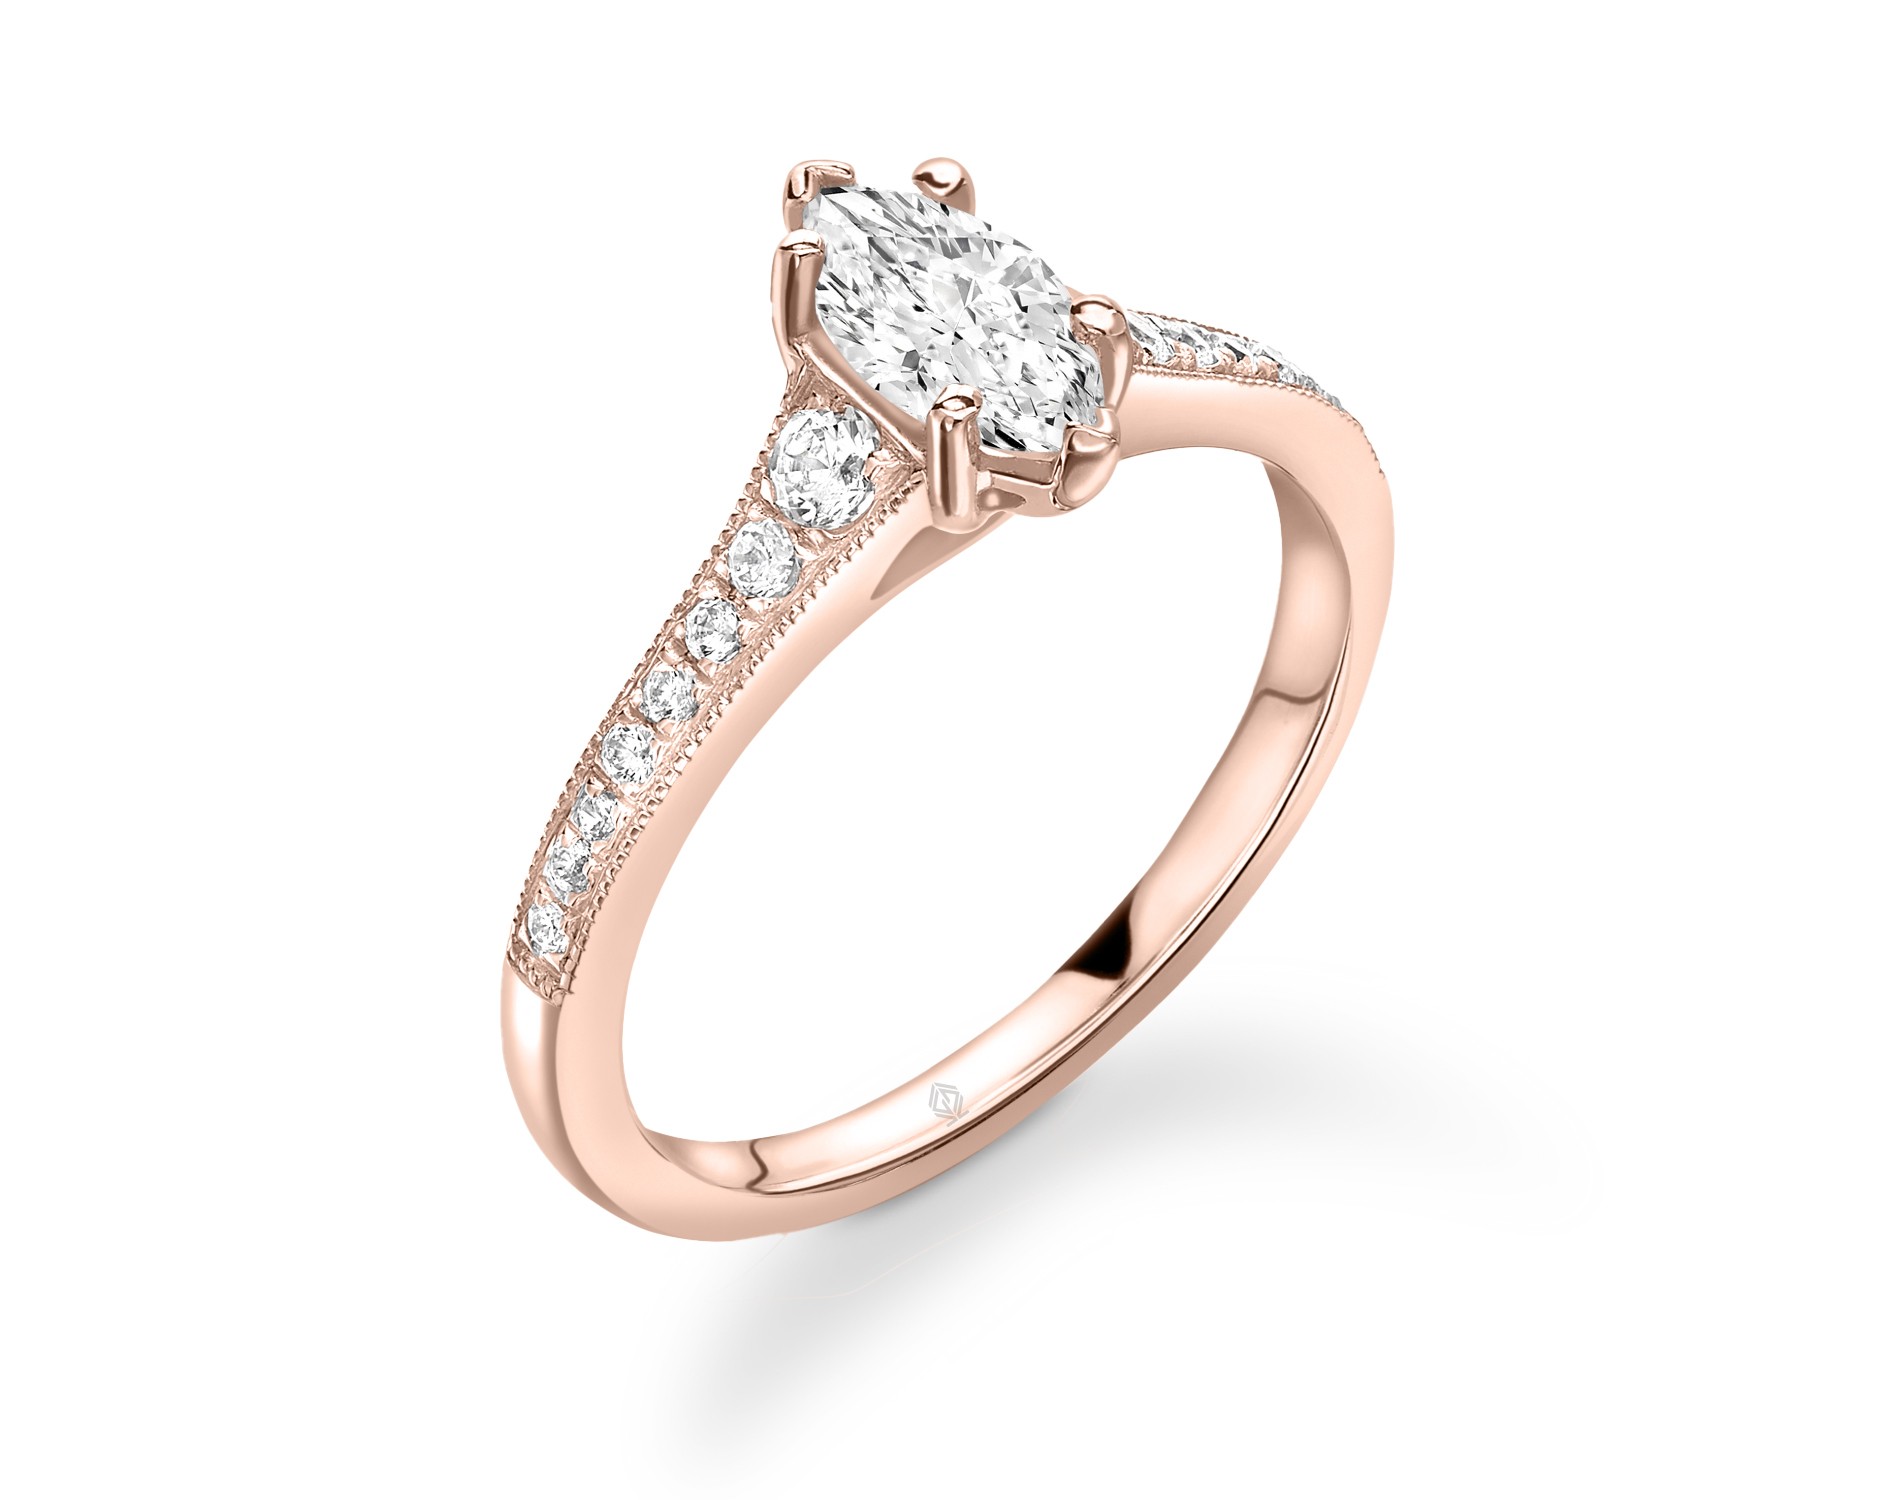 18K ROSE GOLD MARQUISE CUT DIAMOND ENGAGEMENT RING WITH SIDE STONES CHANNEL SET